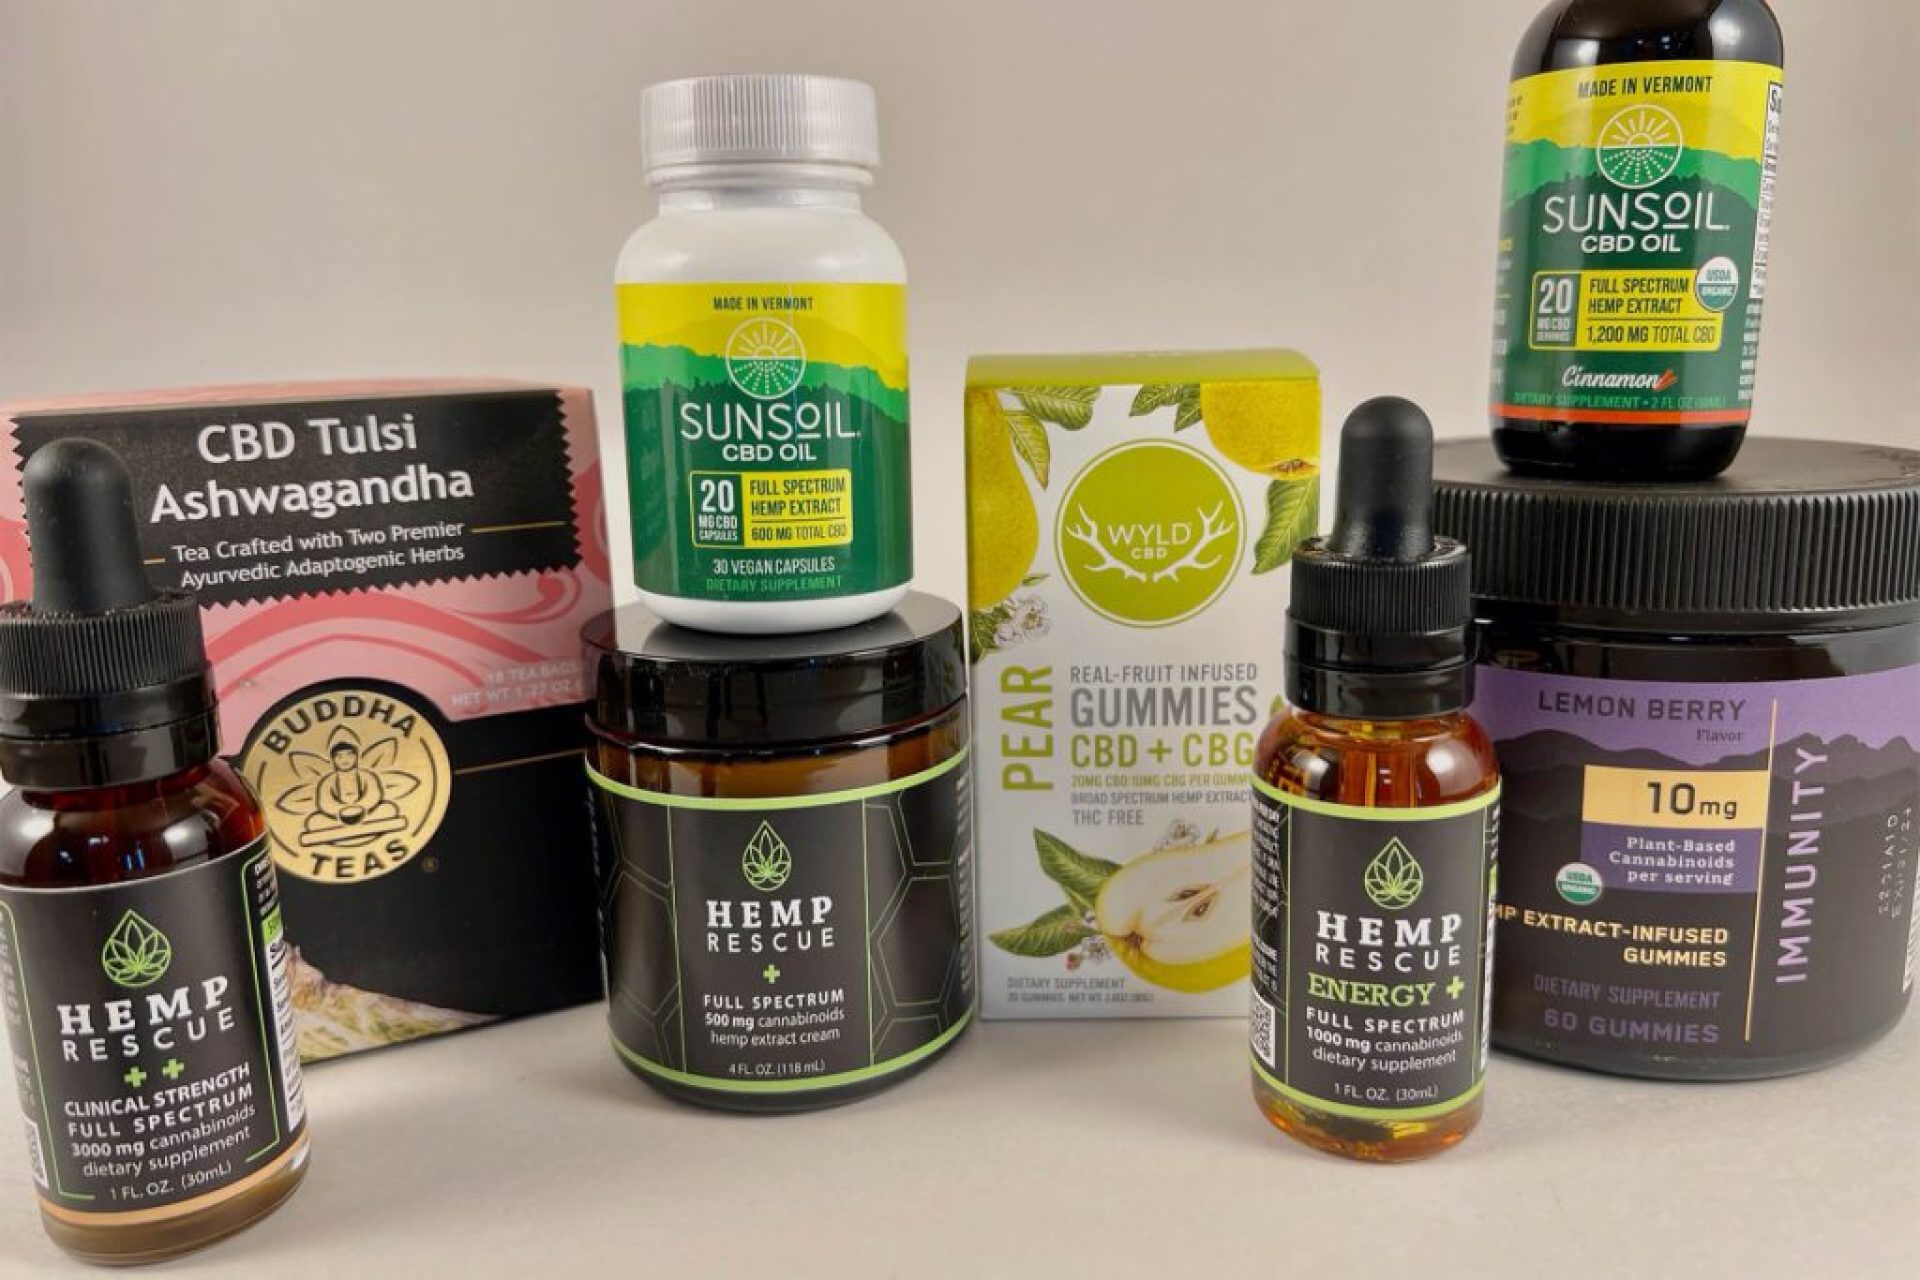 The House of Nutrition Hemp Products